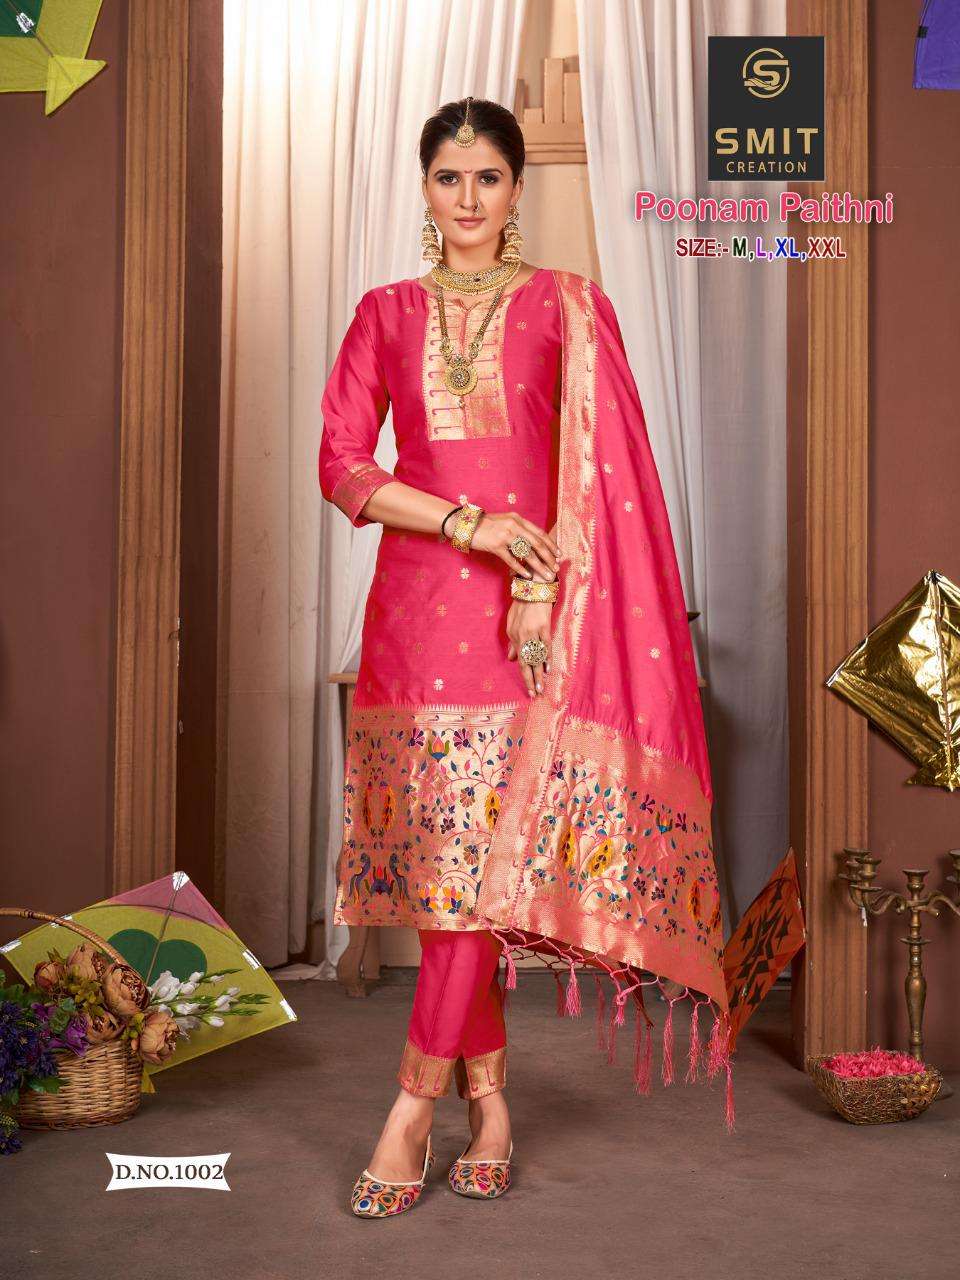 Buy Pink PAITHANI SUITS Salwar Kameez Suit for Women Wear Salwar Kameez  Party Wear Salwar Kameez Punjabi Suit Fency Top Plazo With Duppta Online in  India - Etsy